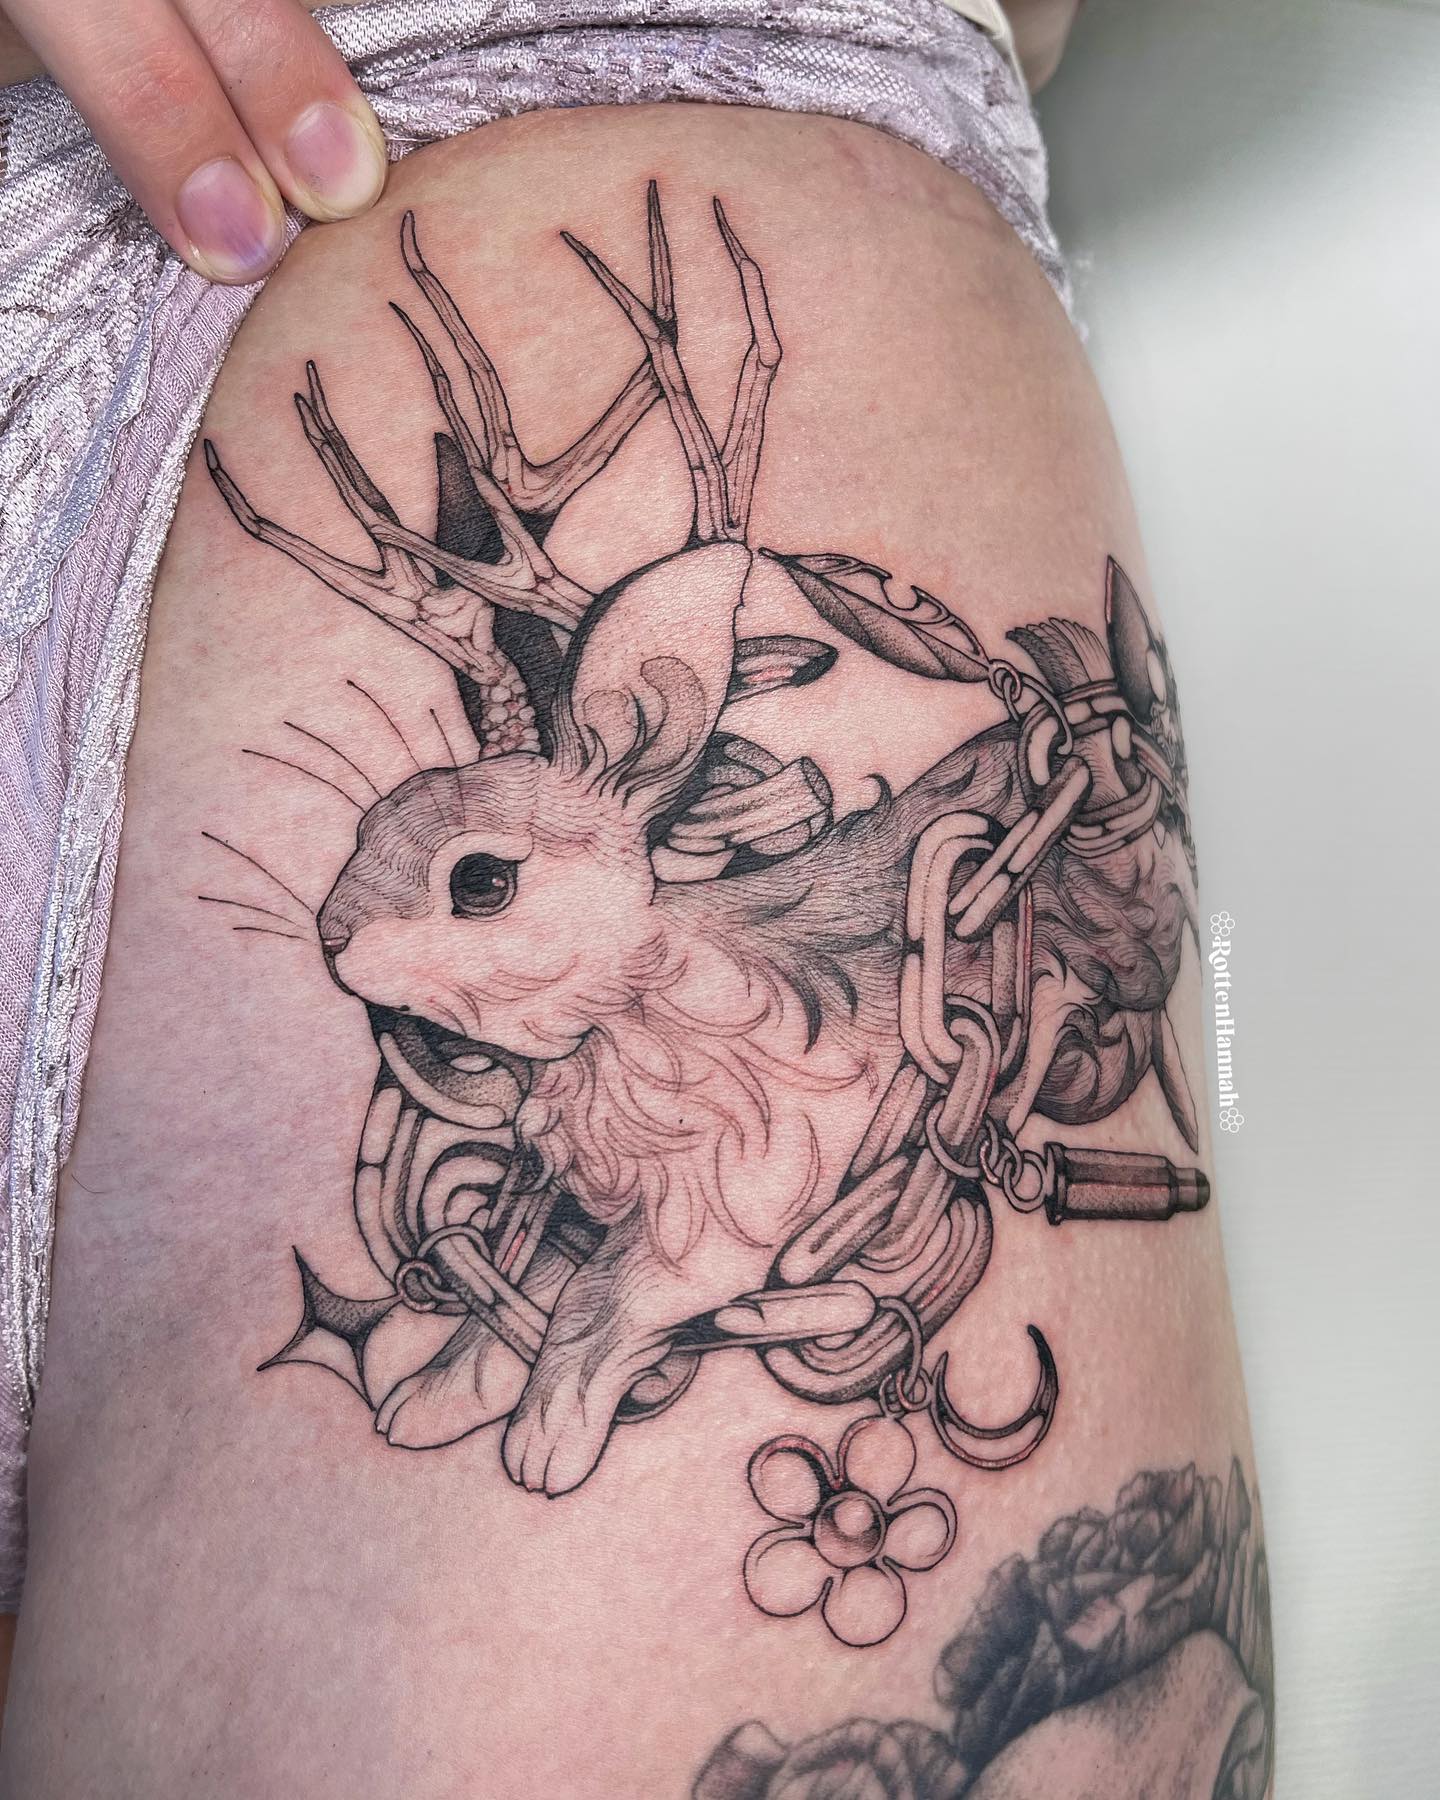 Cute black and white rabbit tattoo that will look cute and playful. If you’re into larger ideas and you want to try out something that is nature and pet-inspired, this is it.